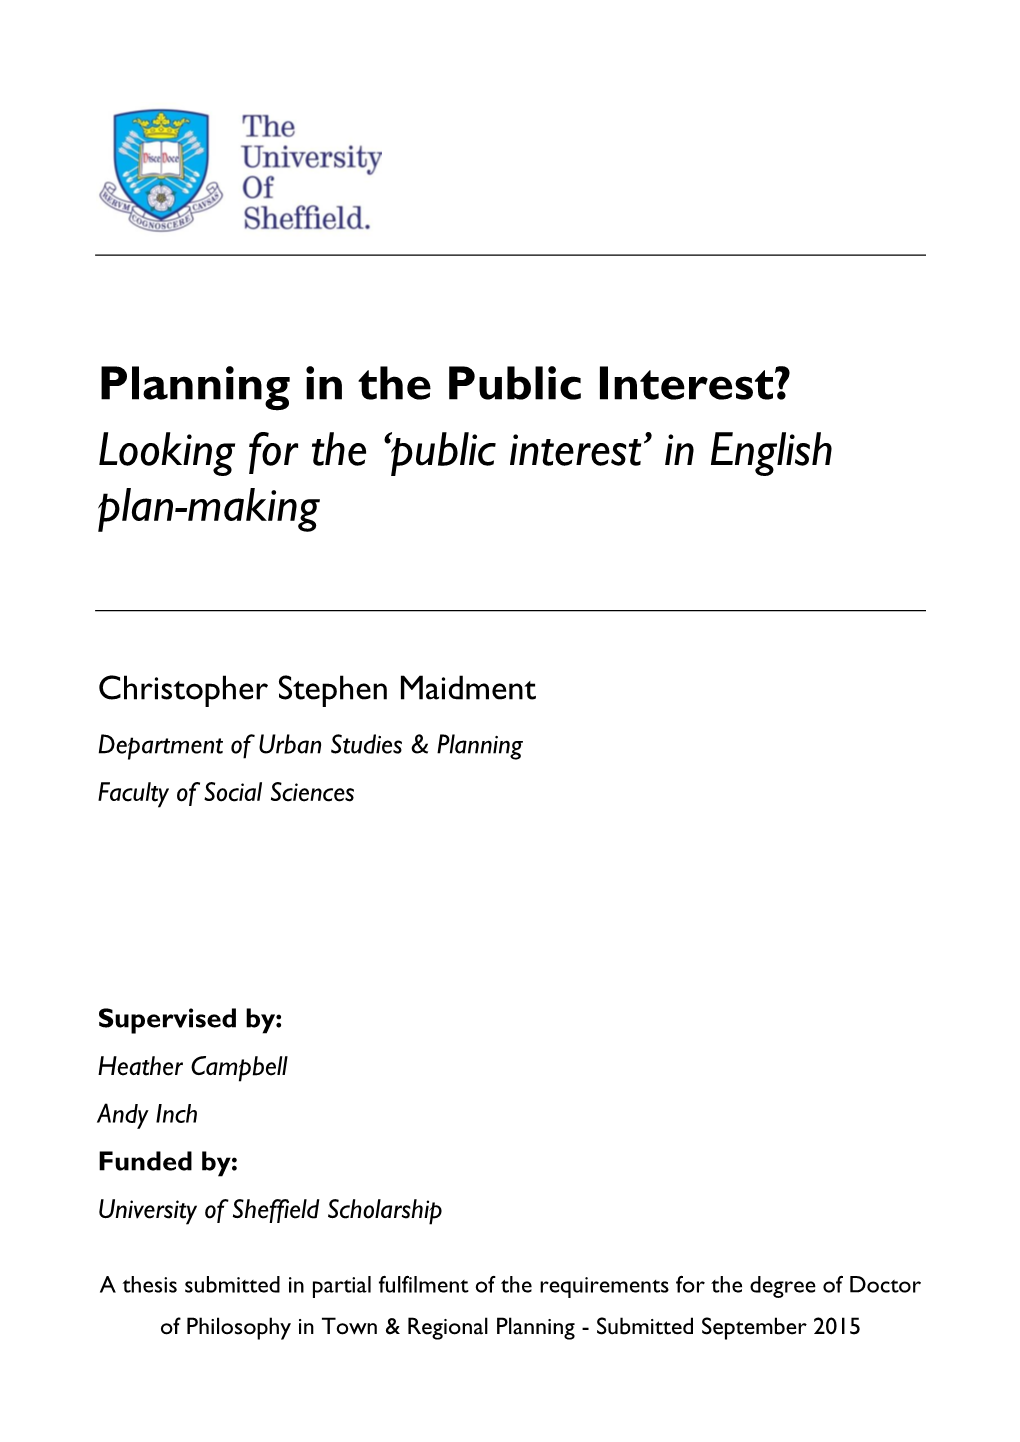 Planning in the Public Interest? Looking for the ‘Public Interest’ in English Plan-Making